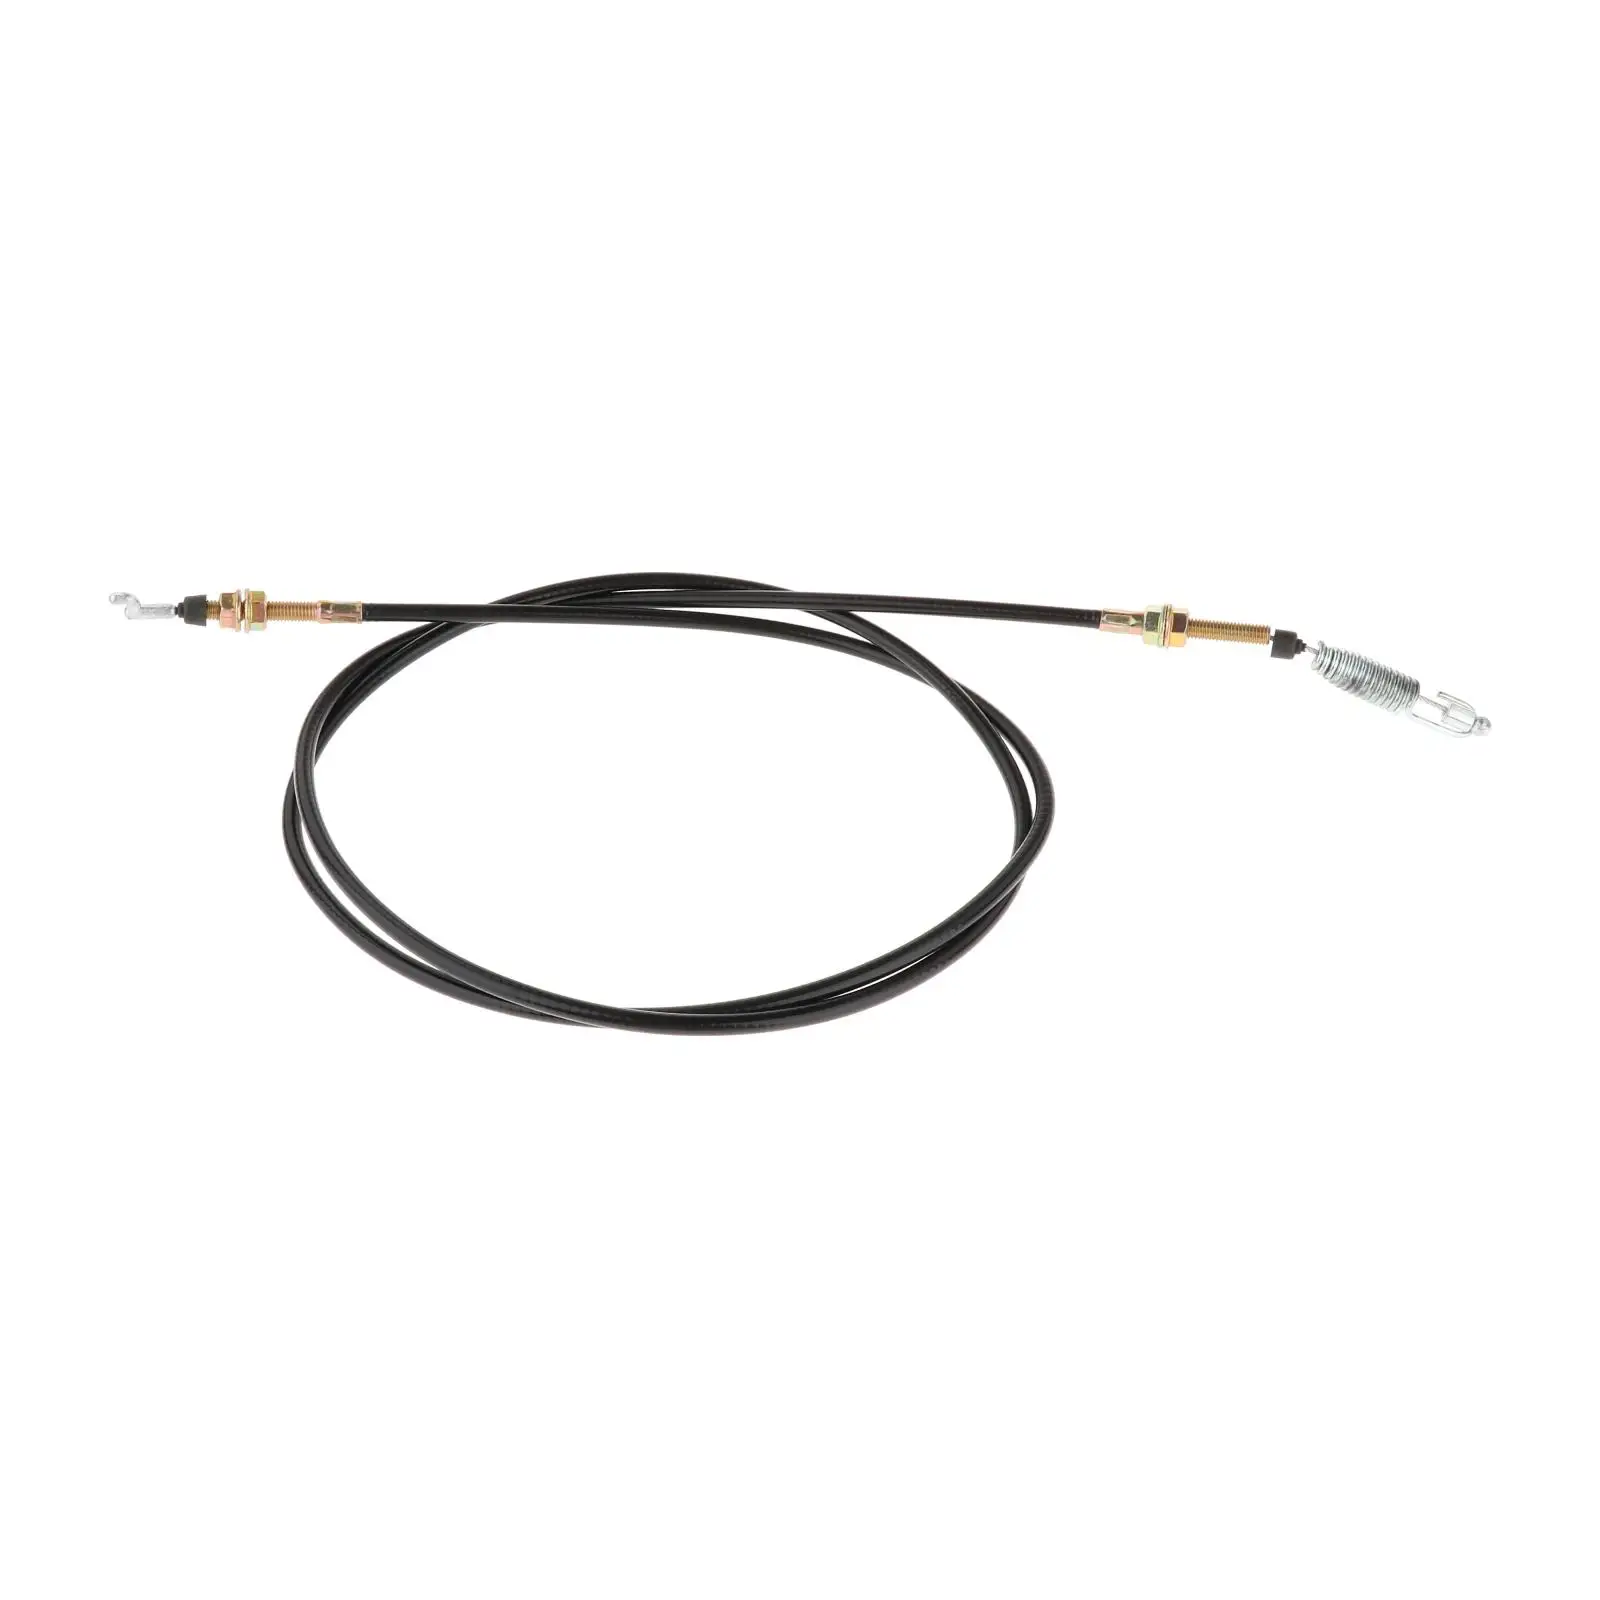 Shifter Cable Replacement suitable for Chuck Wagon Go-Karts 2-11082 Vehicle